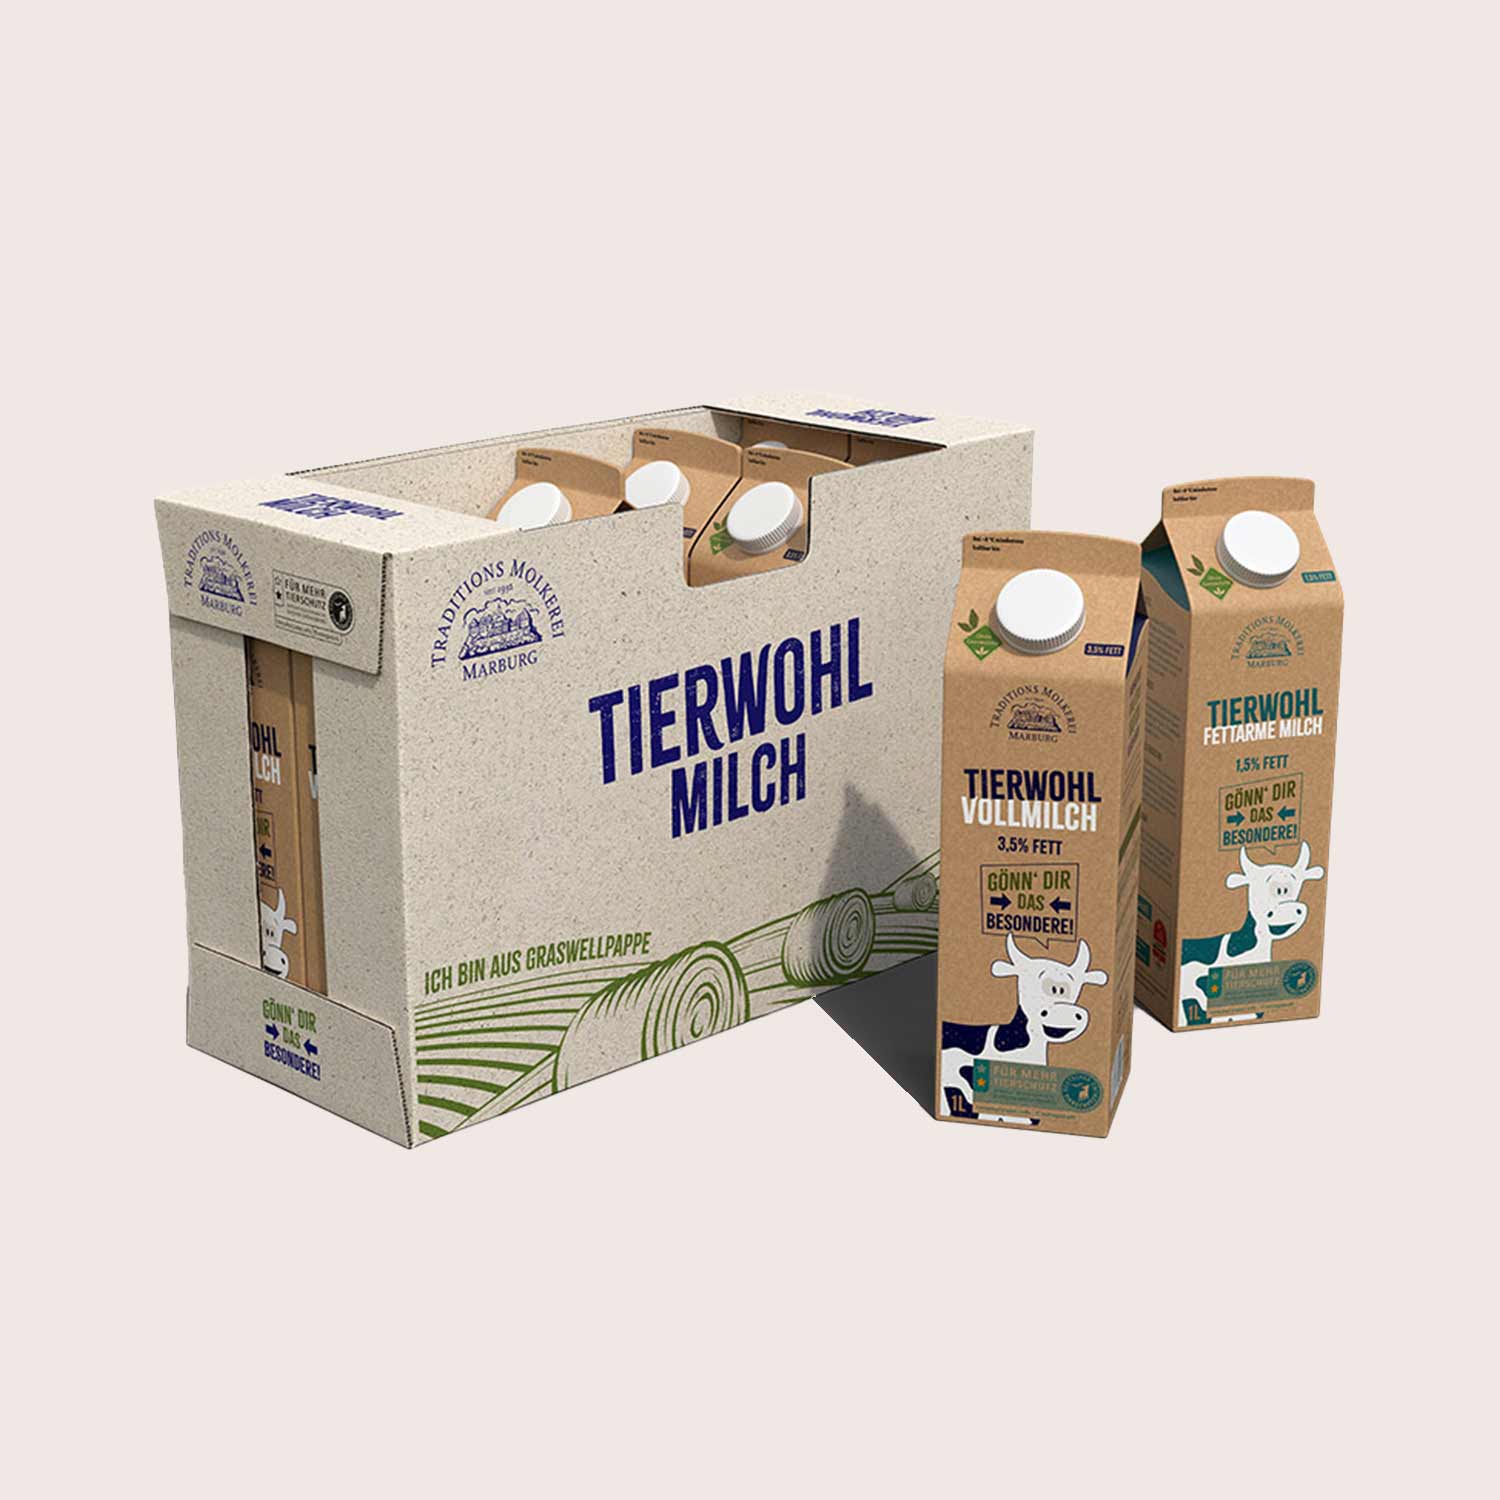 Wrap-around packaging from THIMM